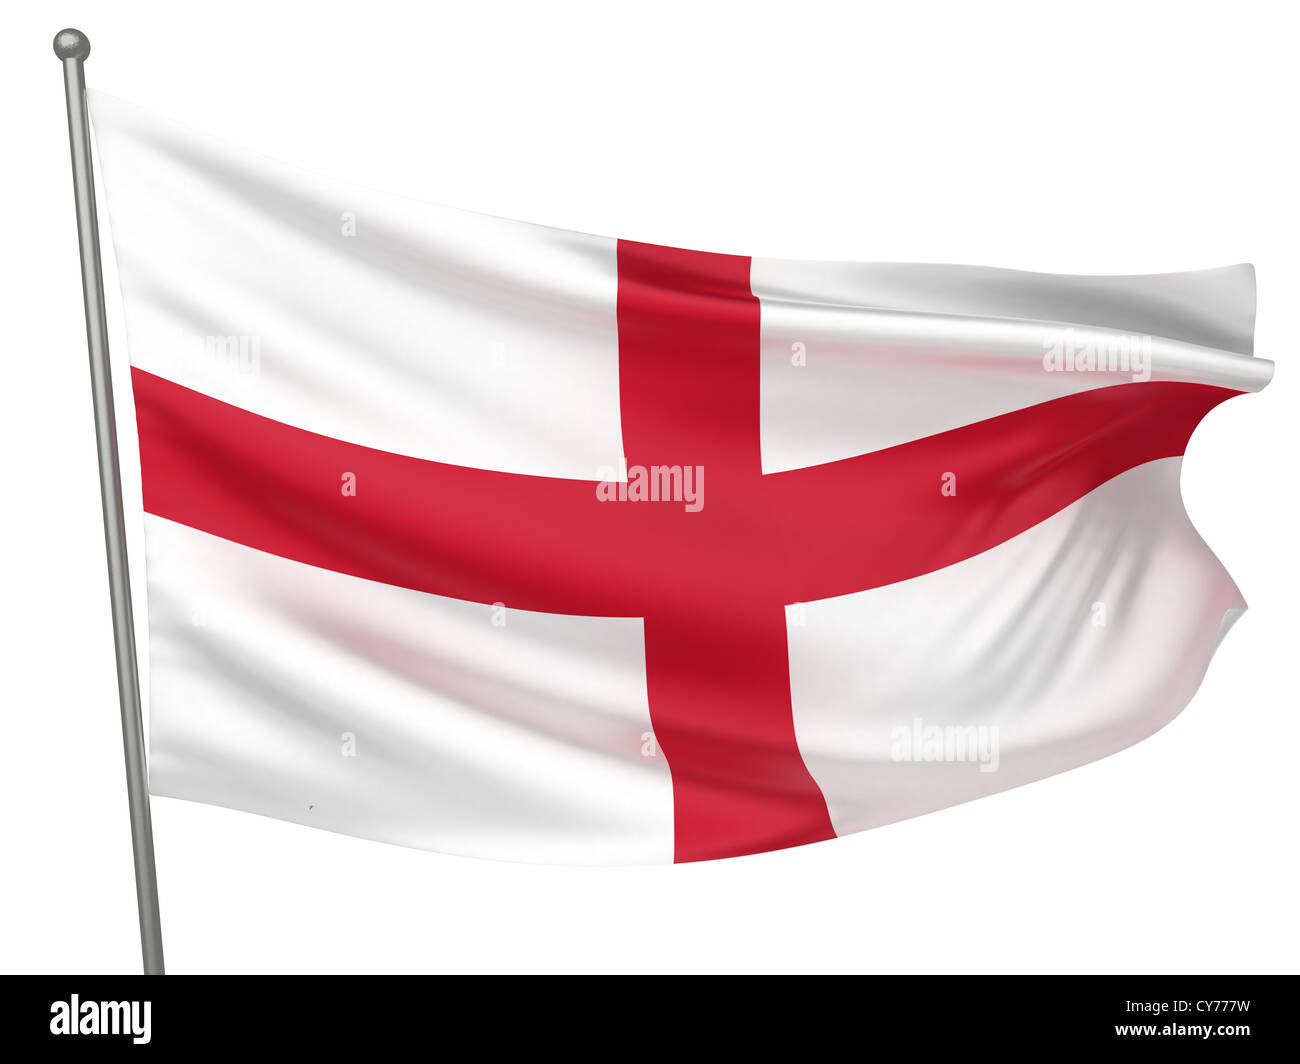 England National Flag - All Countries Collection - Isolated Image Stock Photo